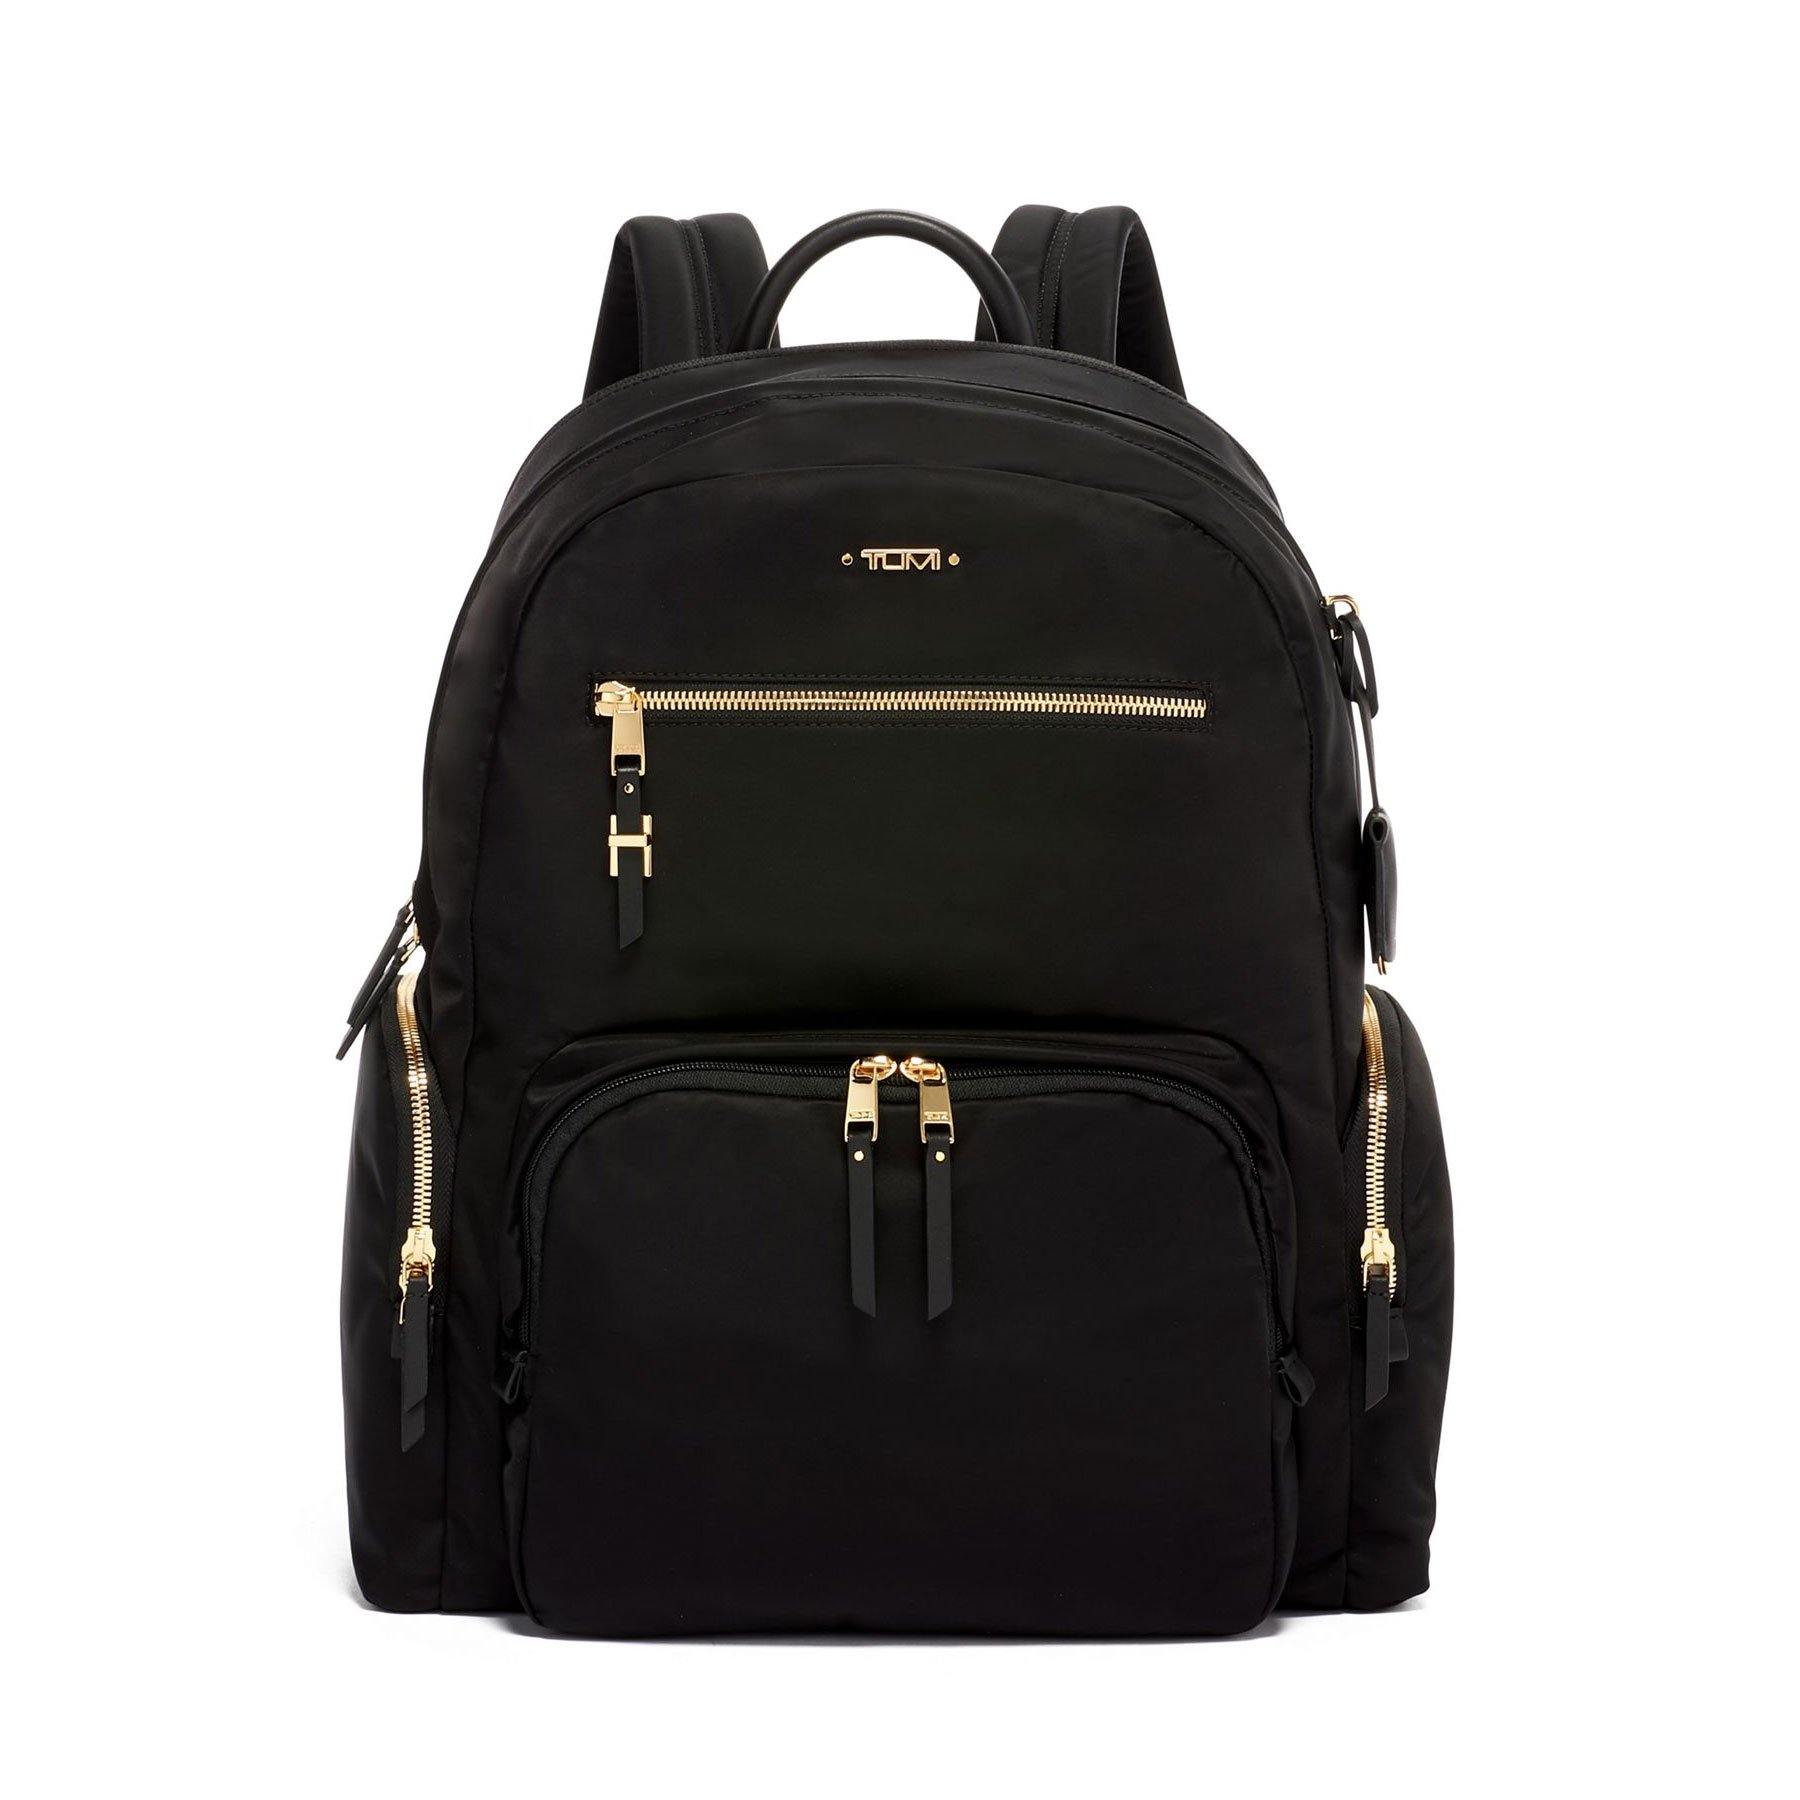 Carson Backpack - Cosmos Boutique New Jersey